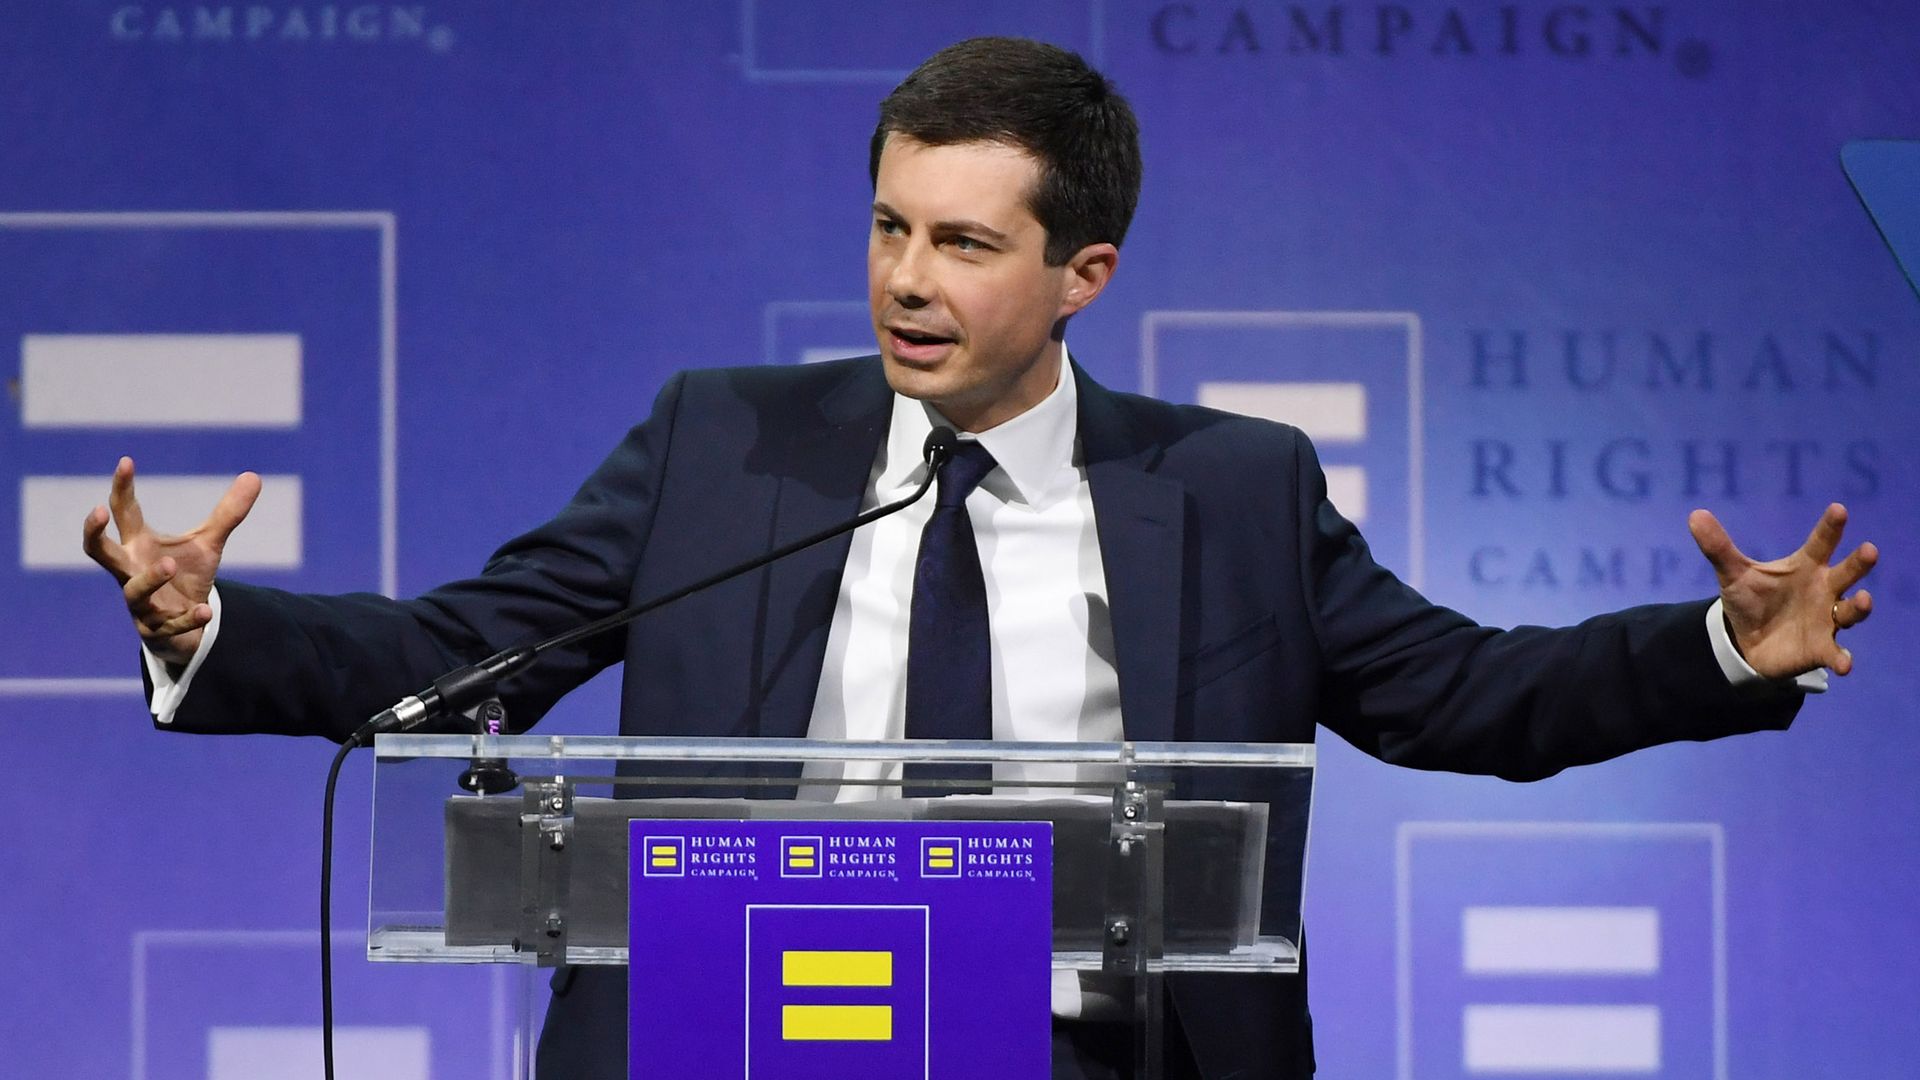 South Bend, Indiana Mayor Pete Buttigieg delivers a keynote address at the Human Rights Campaign's (HRC) 14th annual Las Vegas Gala at Caesars Palace on May 11, 2019 in Las Vegas, Nevada. 